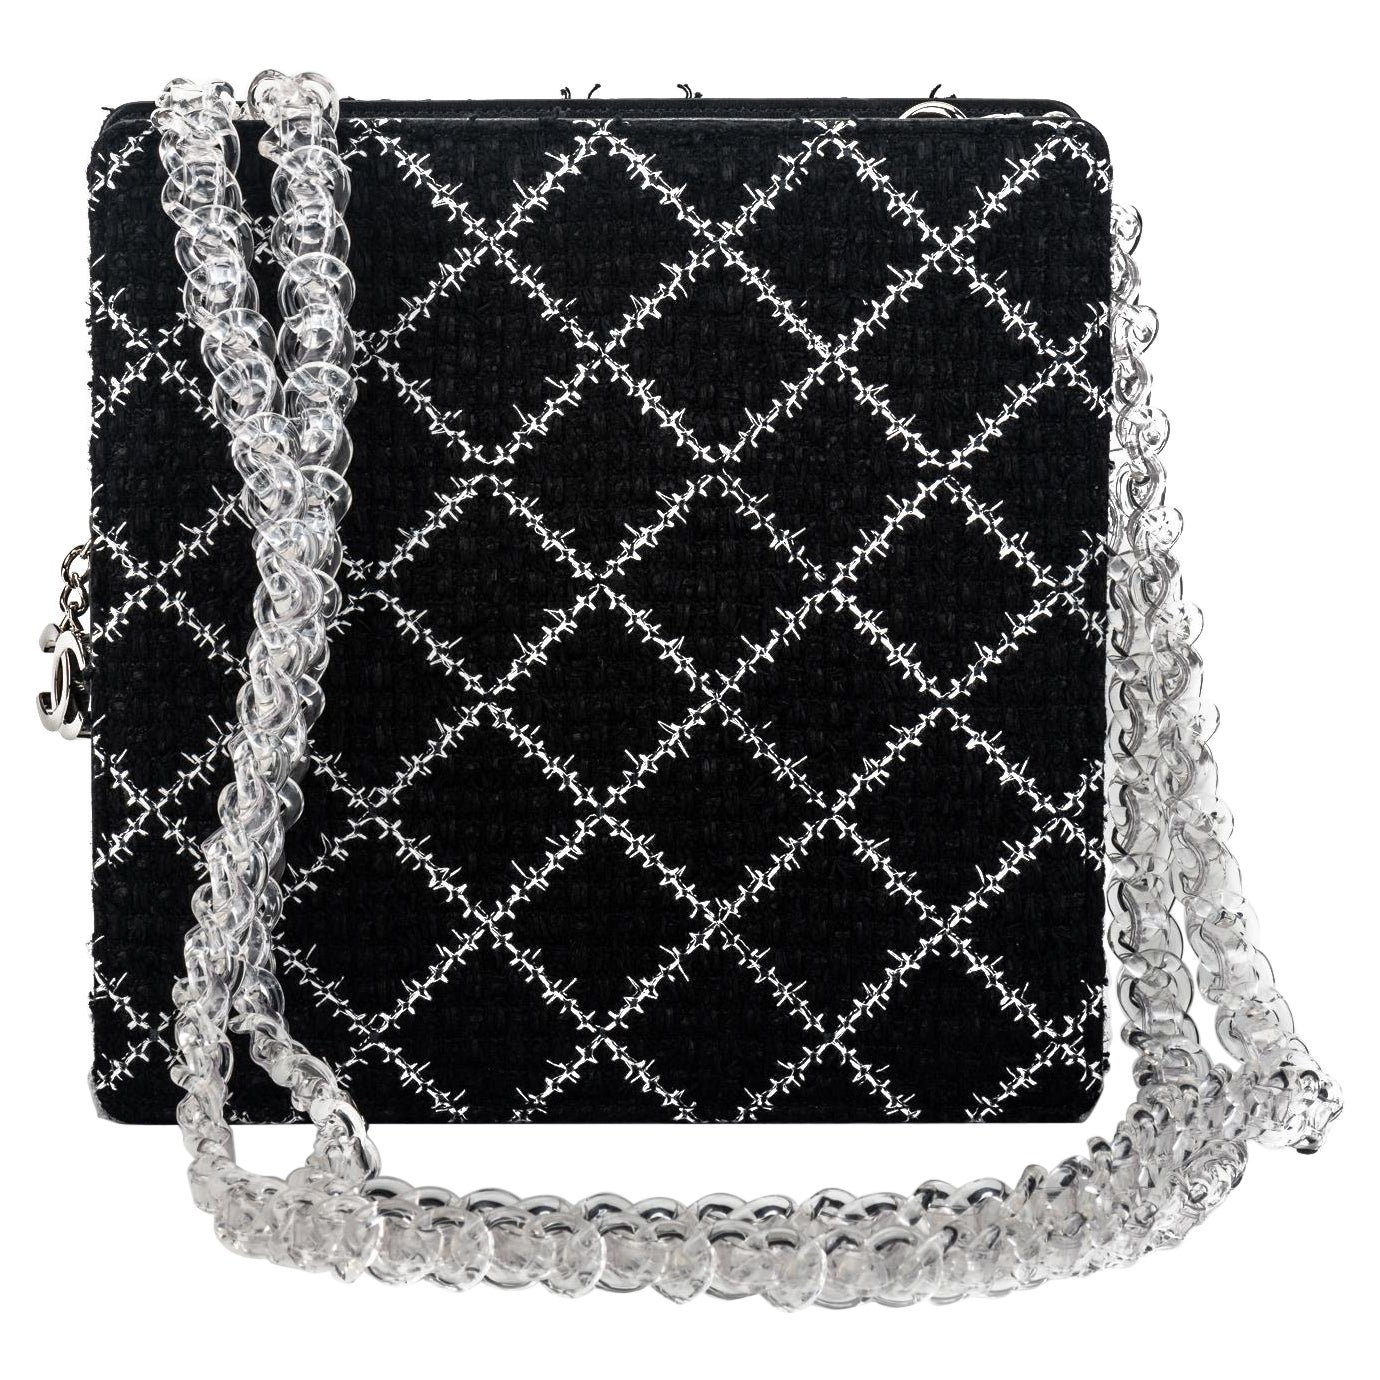 New Chanel Black Tweed Clear Lucite Bag For Sale